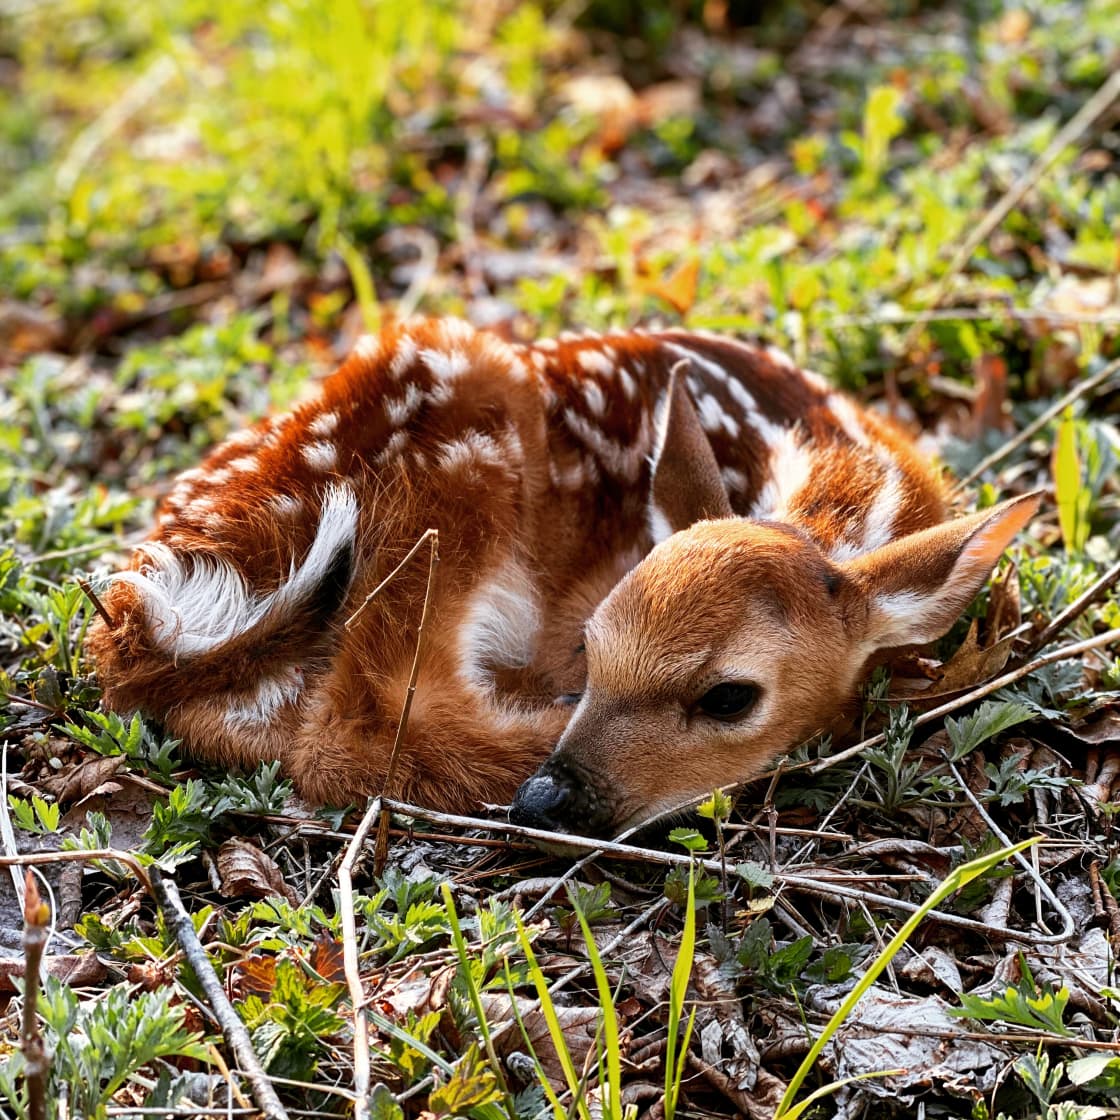 A fawn born on the norther part of the Isle